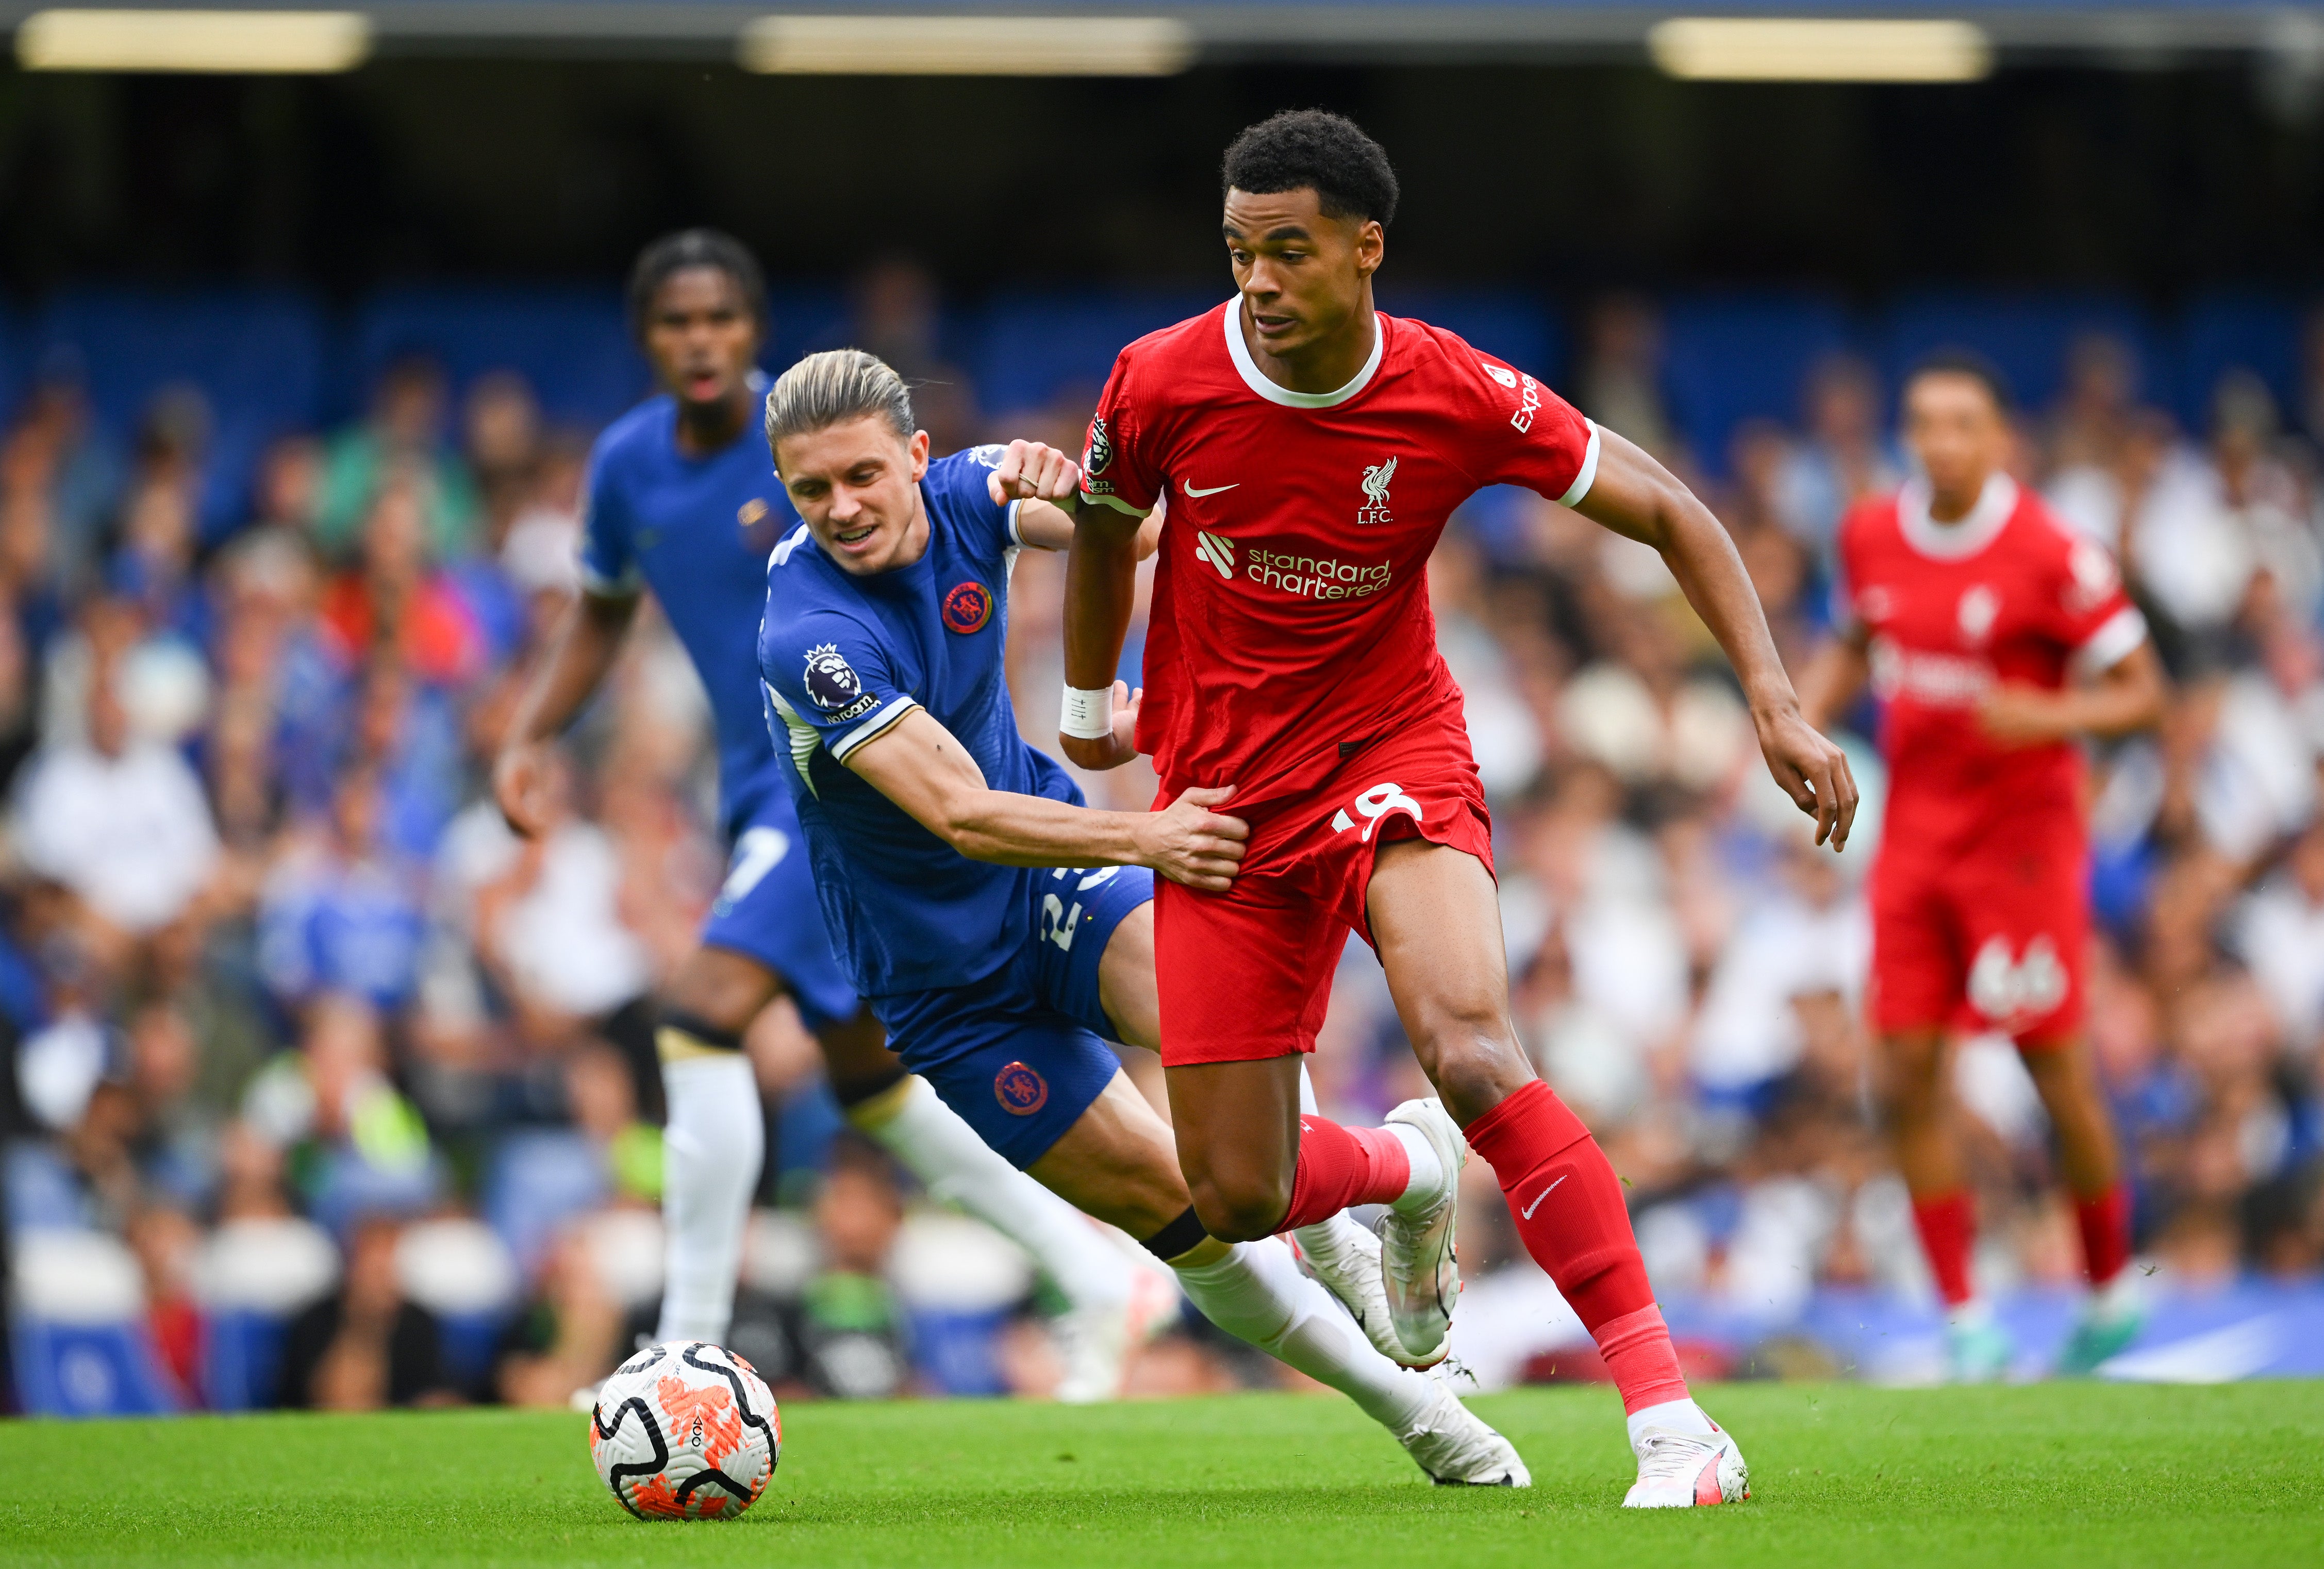 Chelsea and Liverpool serve up entertaining glimpse of football without defensive midfielders | The Independent